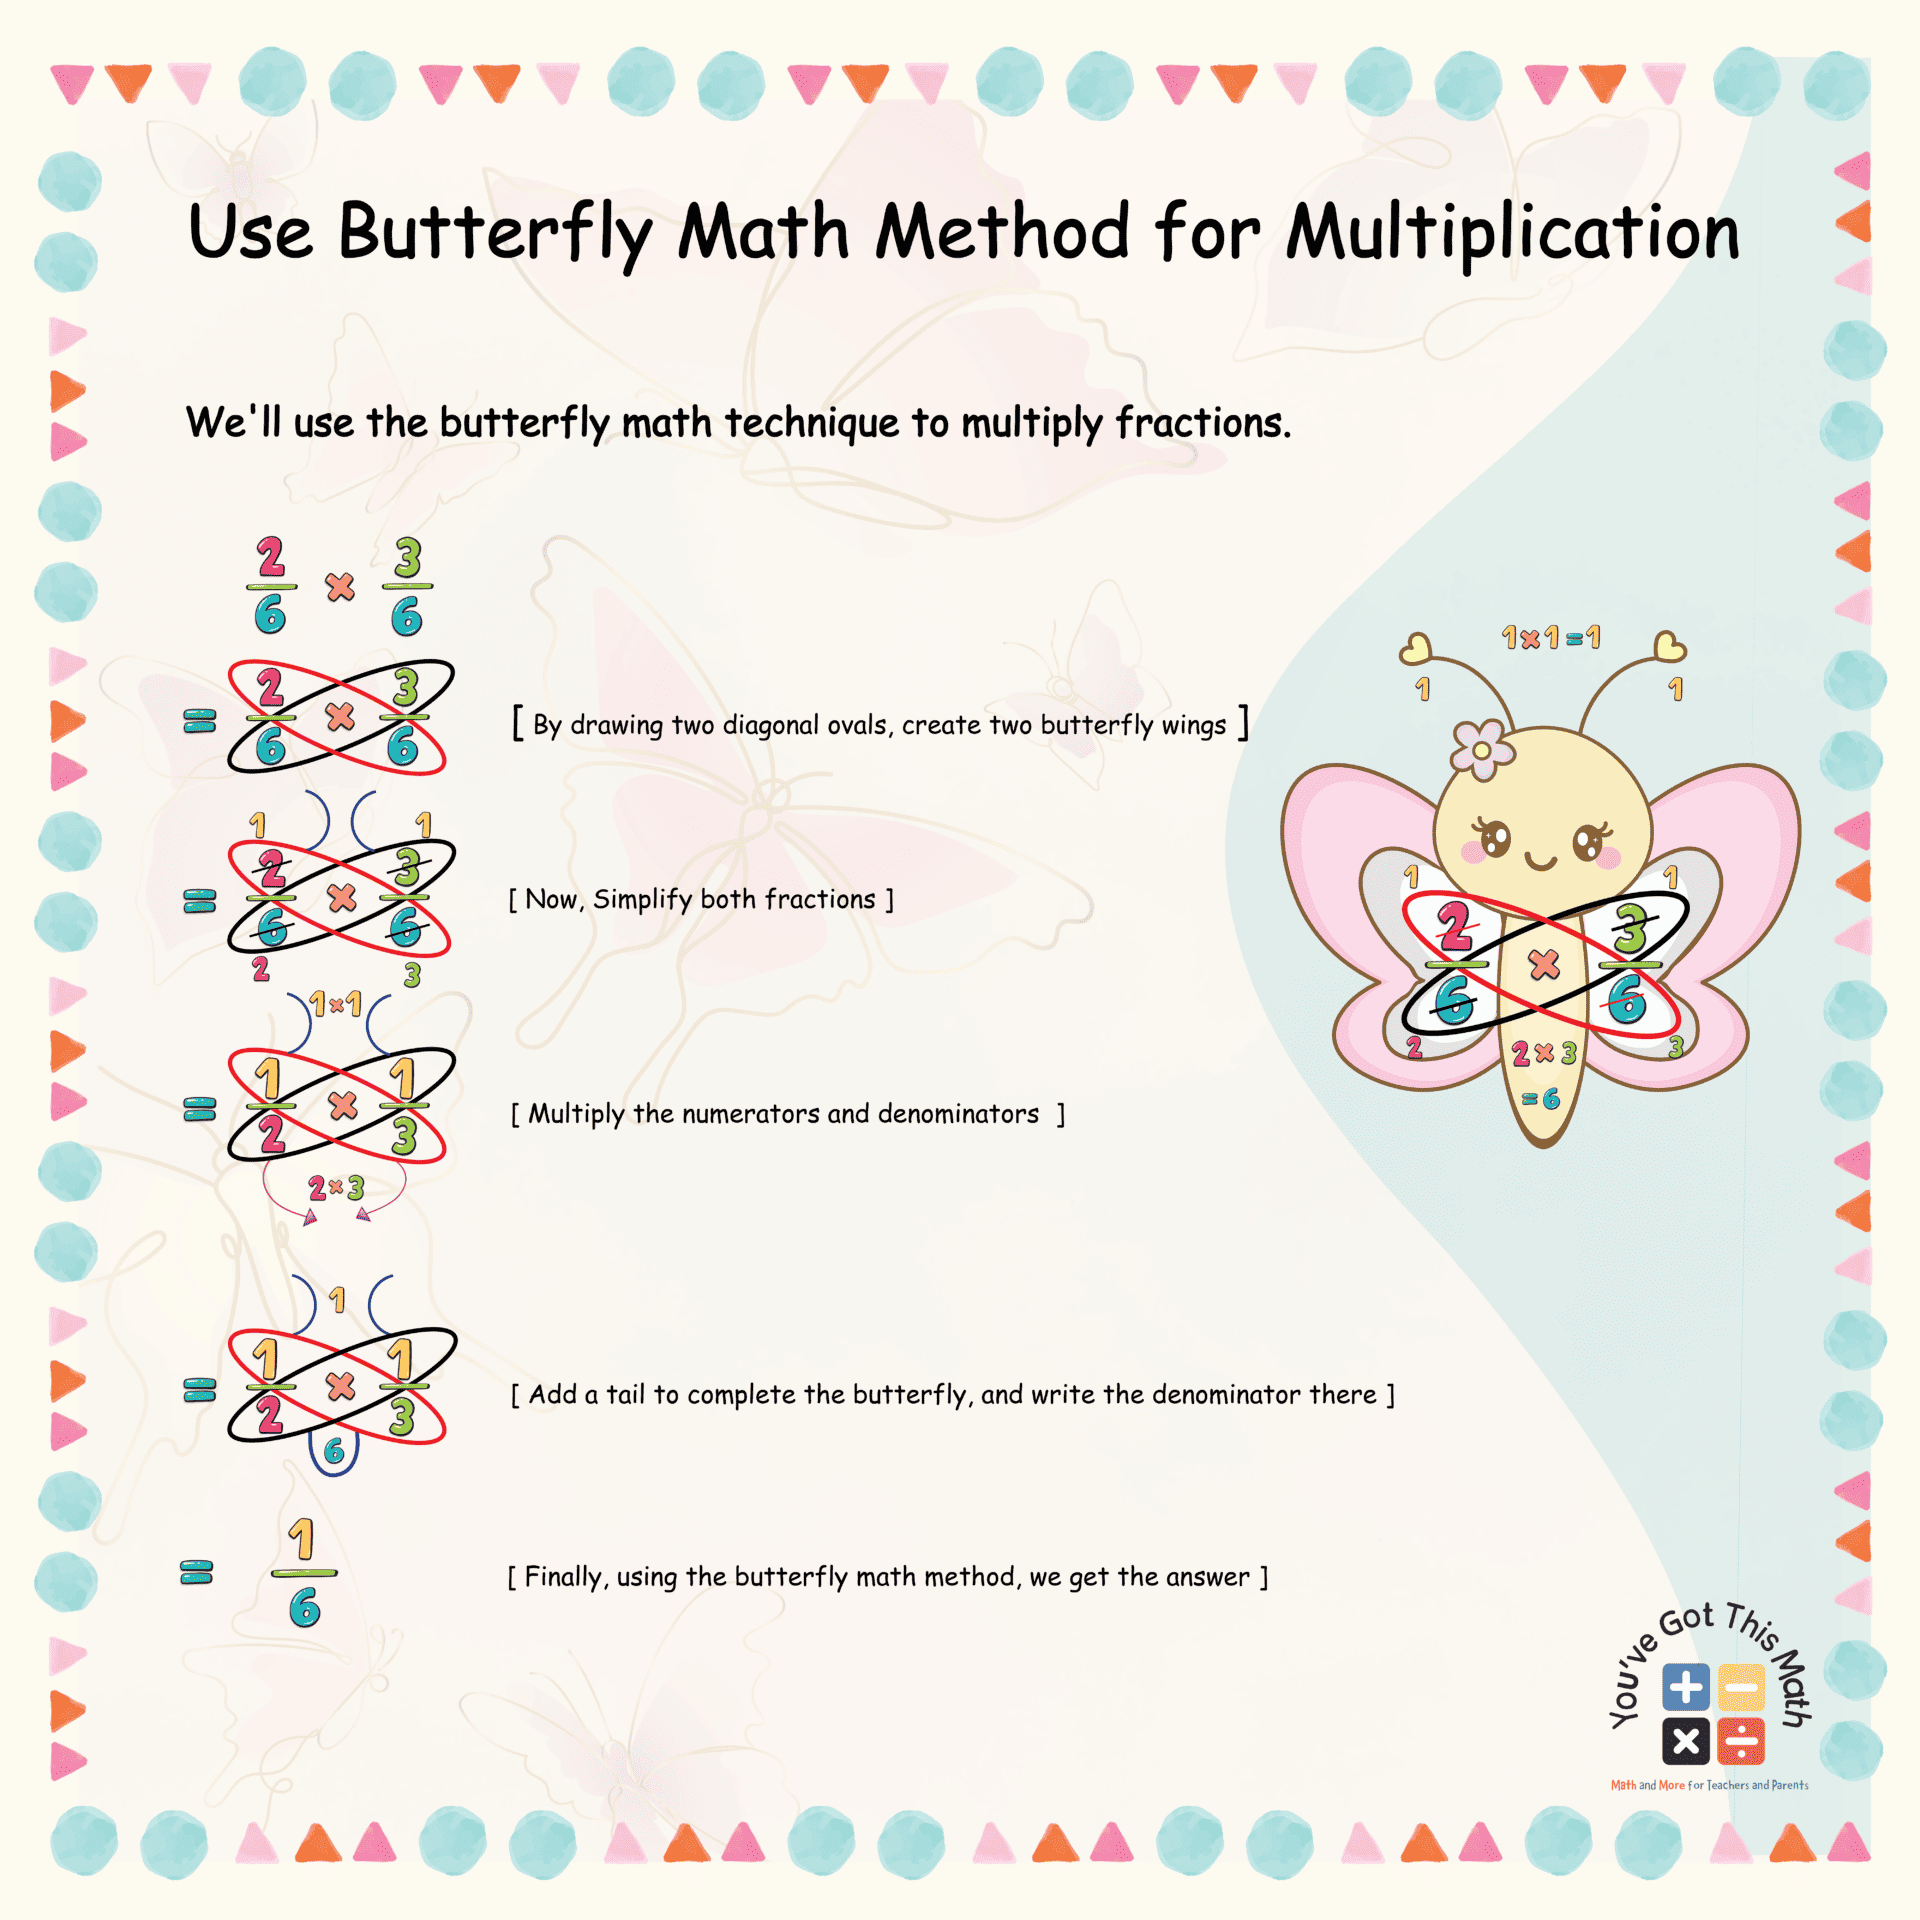 Use Butterfly Math Method for Multiplication